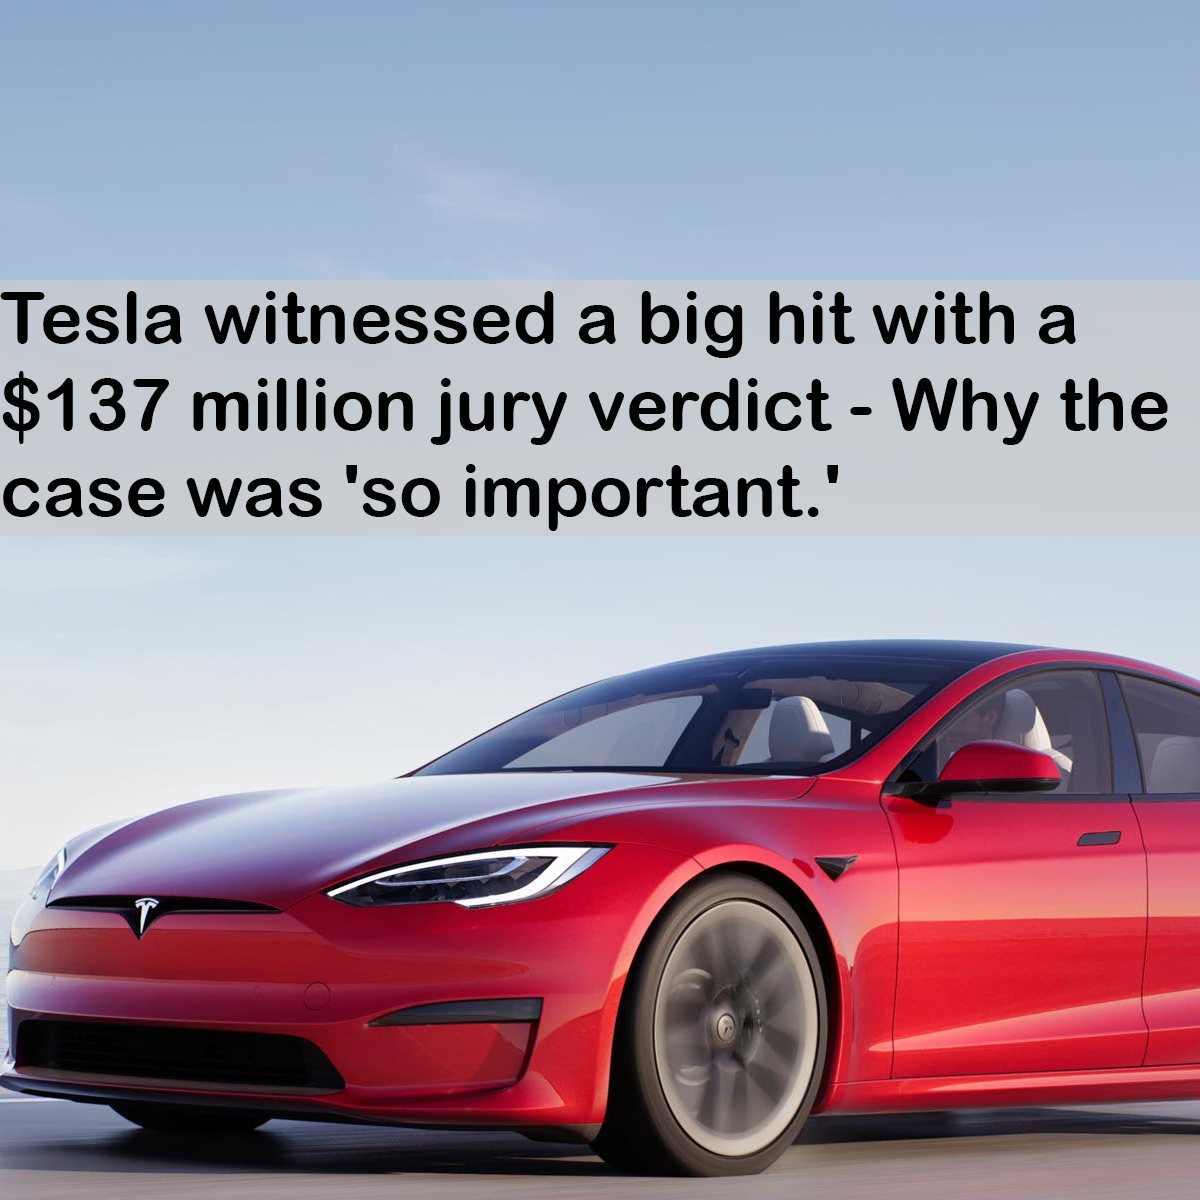 Tesla witnessed a big hit with a $137 million jury verdict - Why the case was 'so important.'